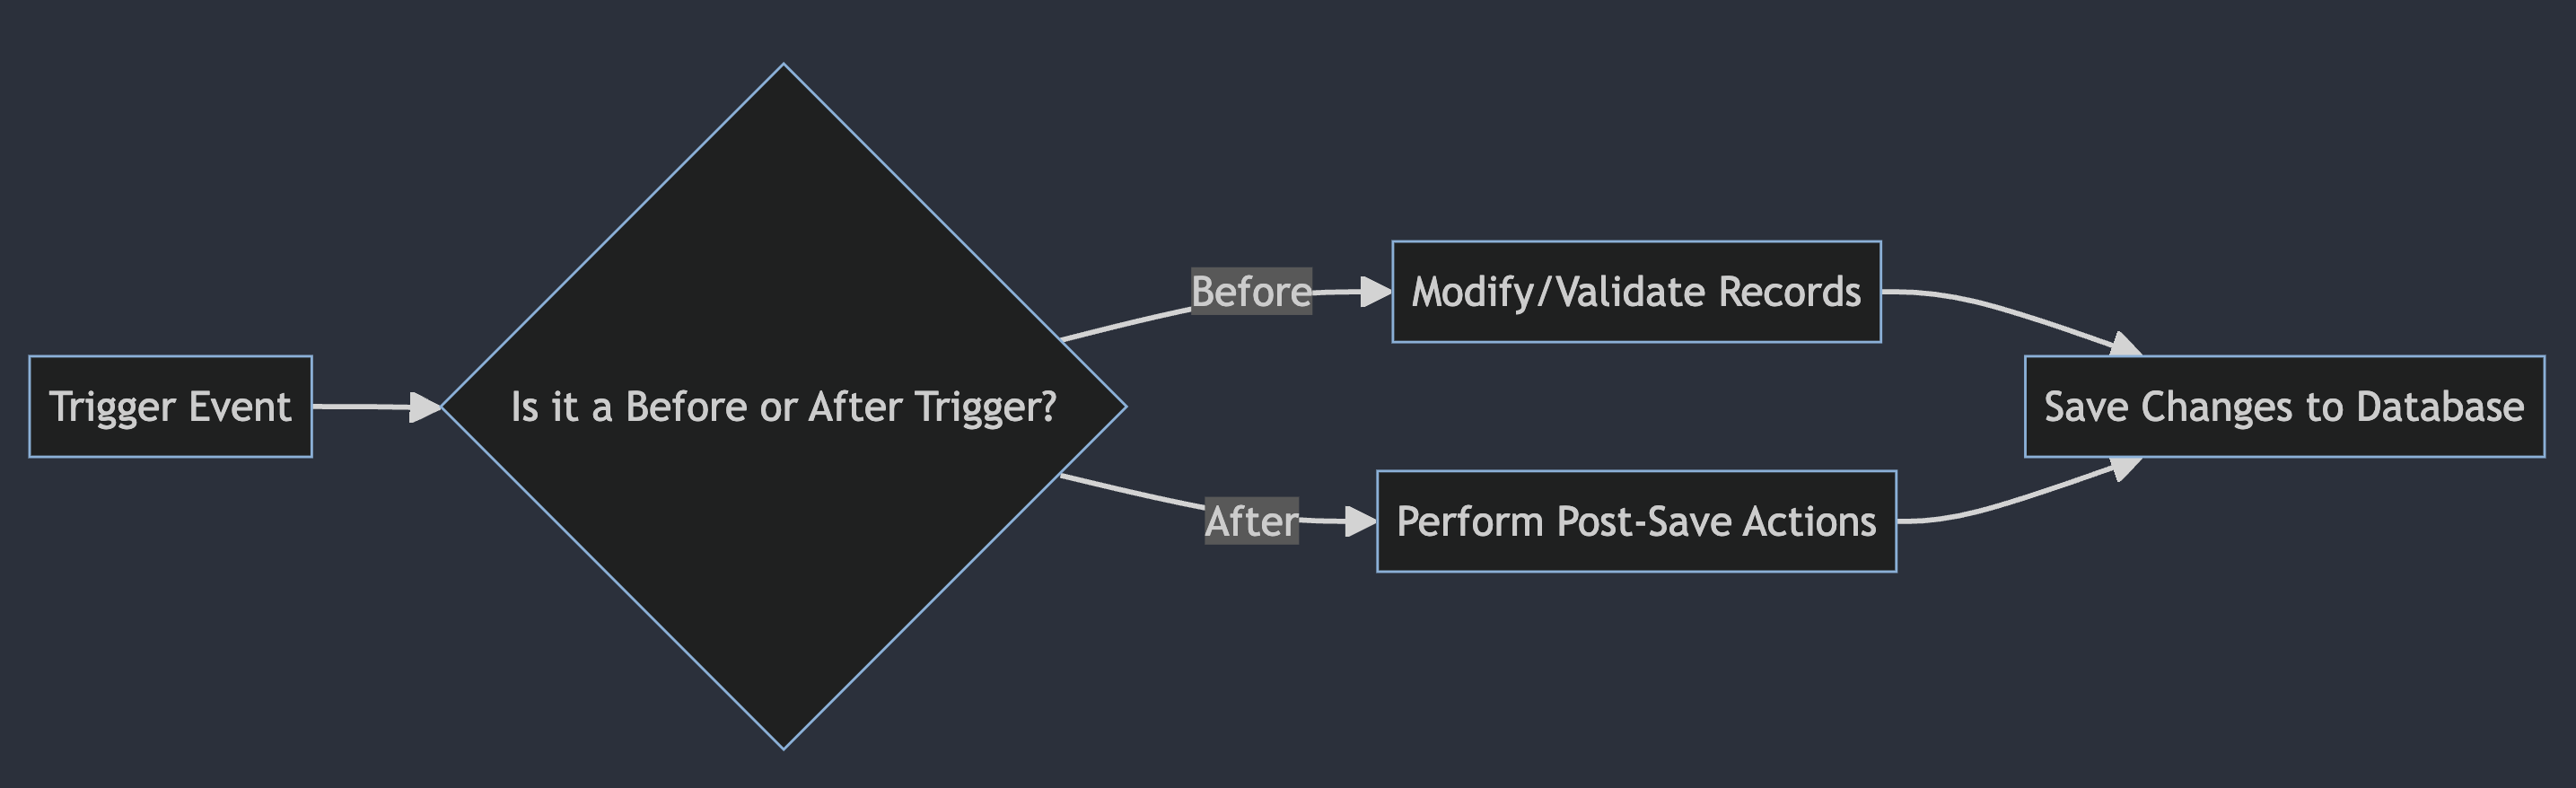 Screenshot of how the flow of triggers works